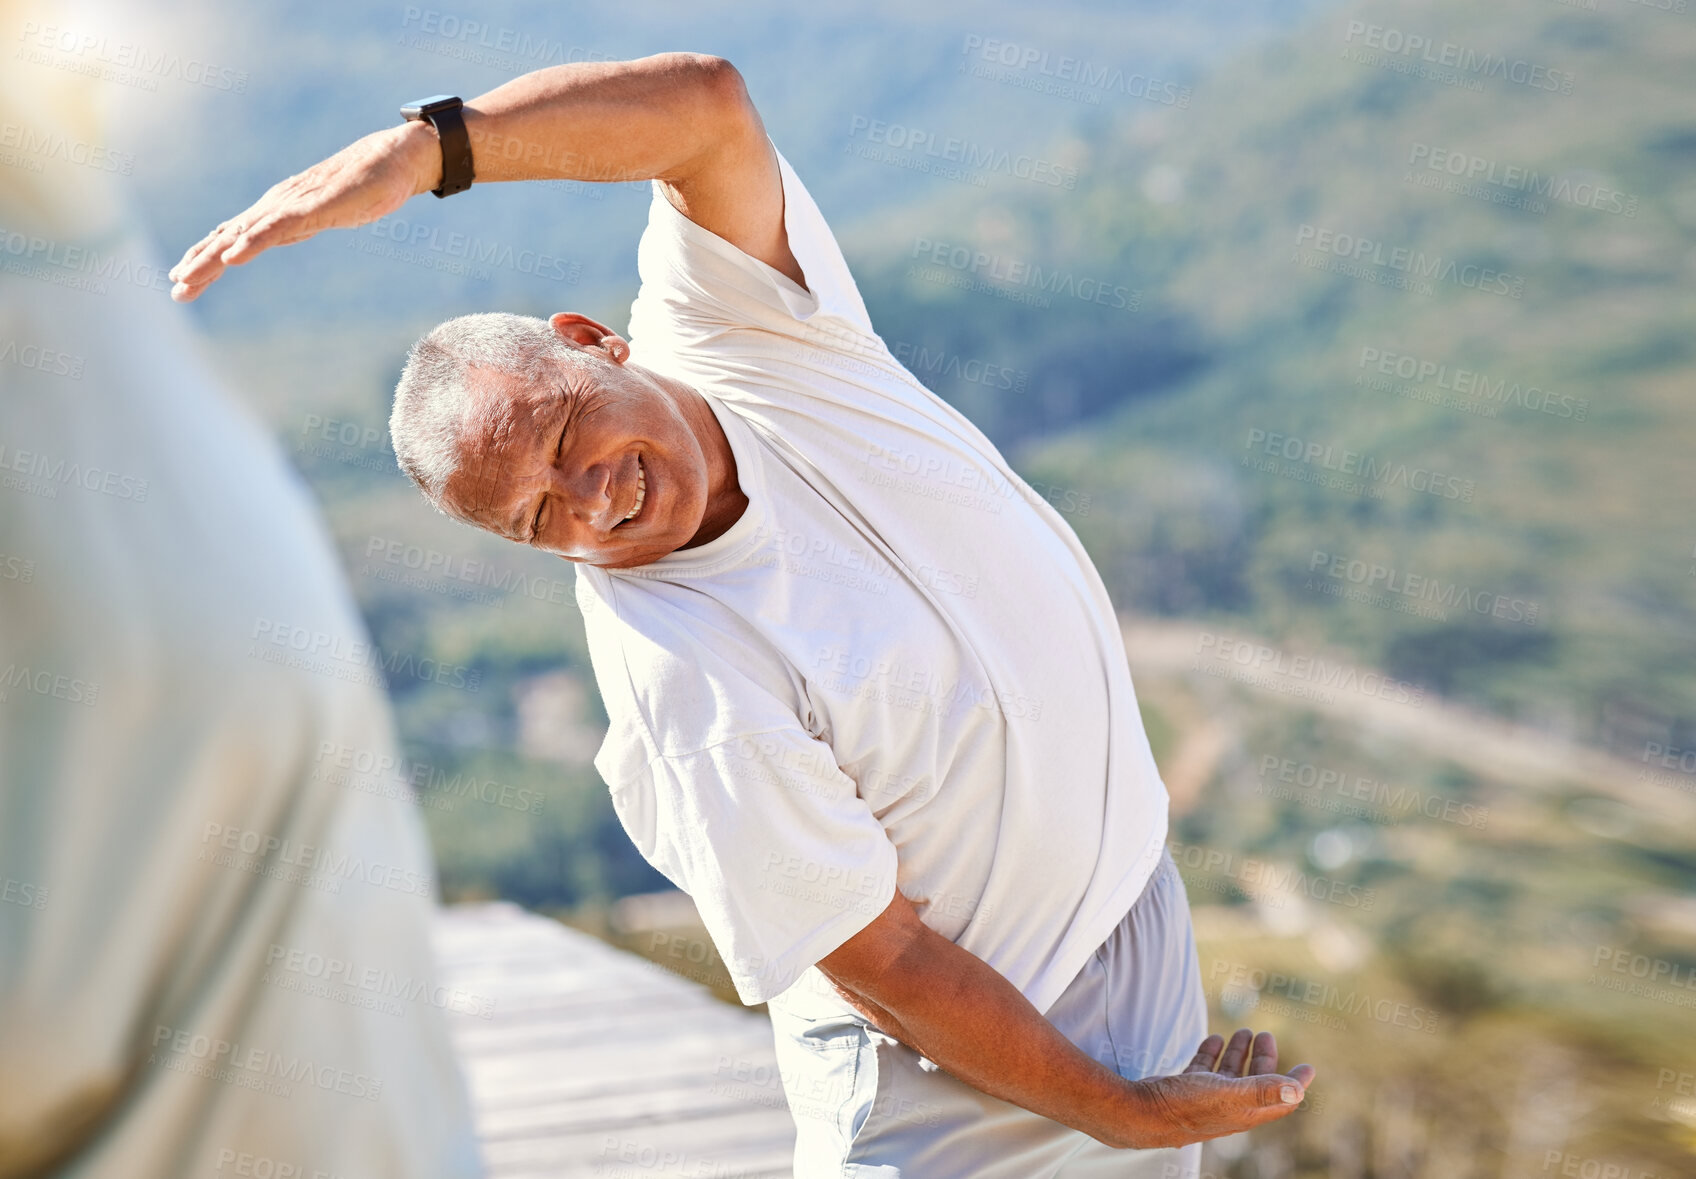 Buy stock photo Senior man laughing while stretching his hand over his head while exercising outdoors. Mixed race man staying fit with yoga classes. Finding inner peace, balance and living healthy